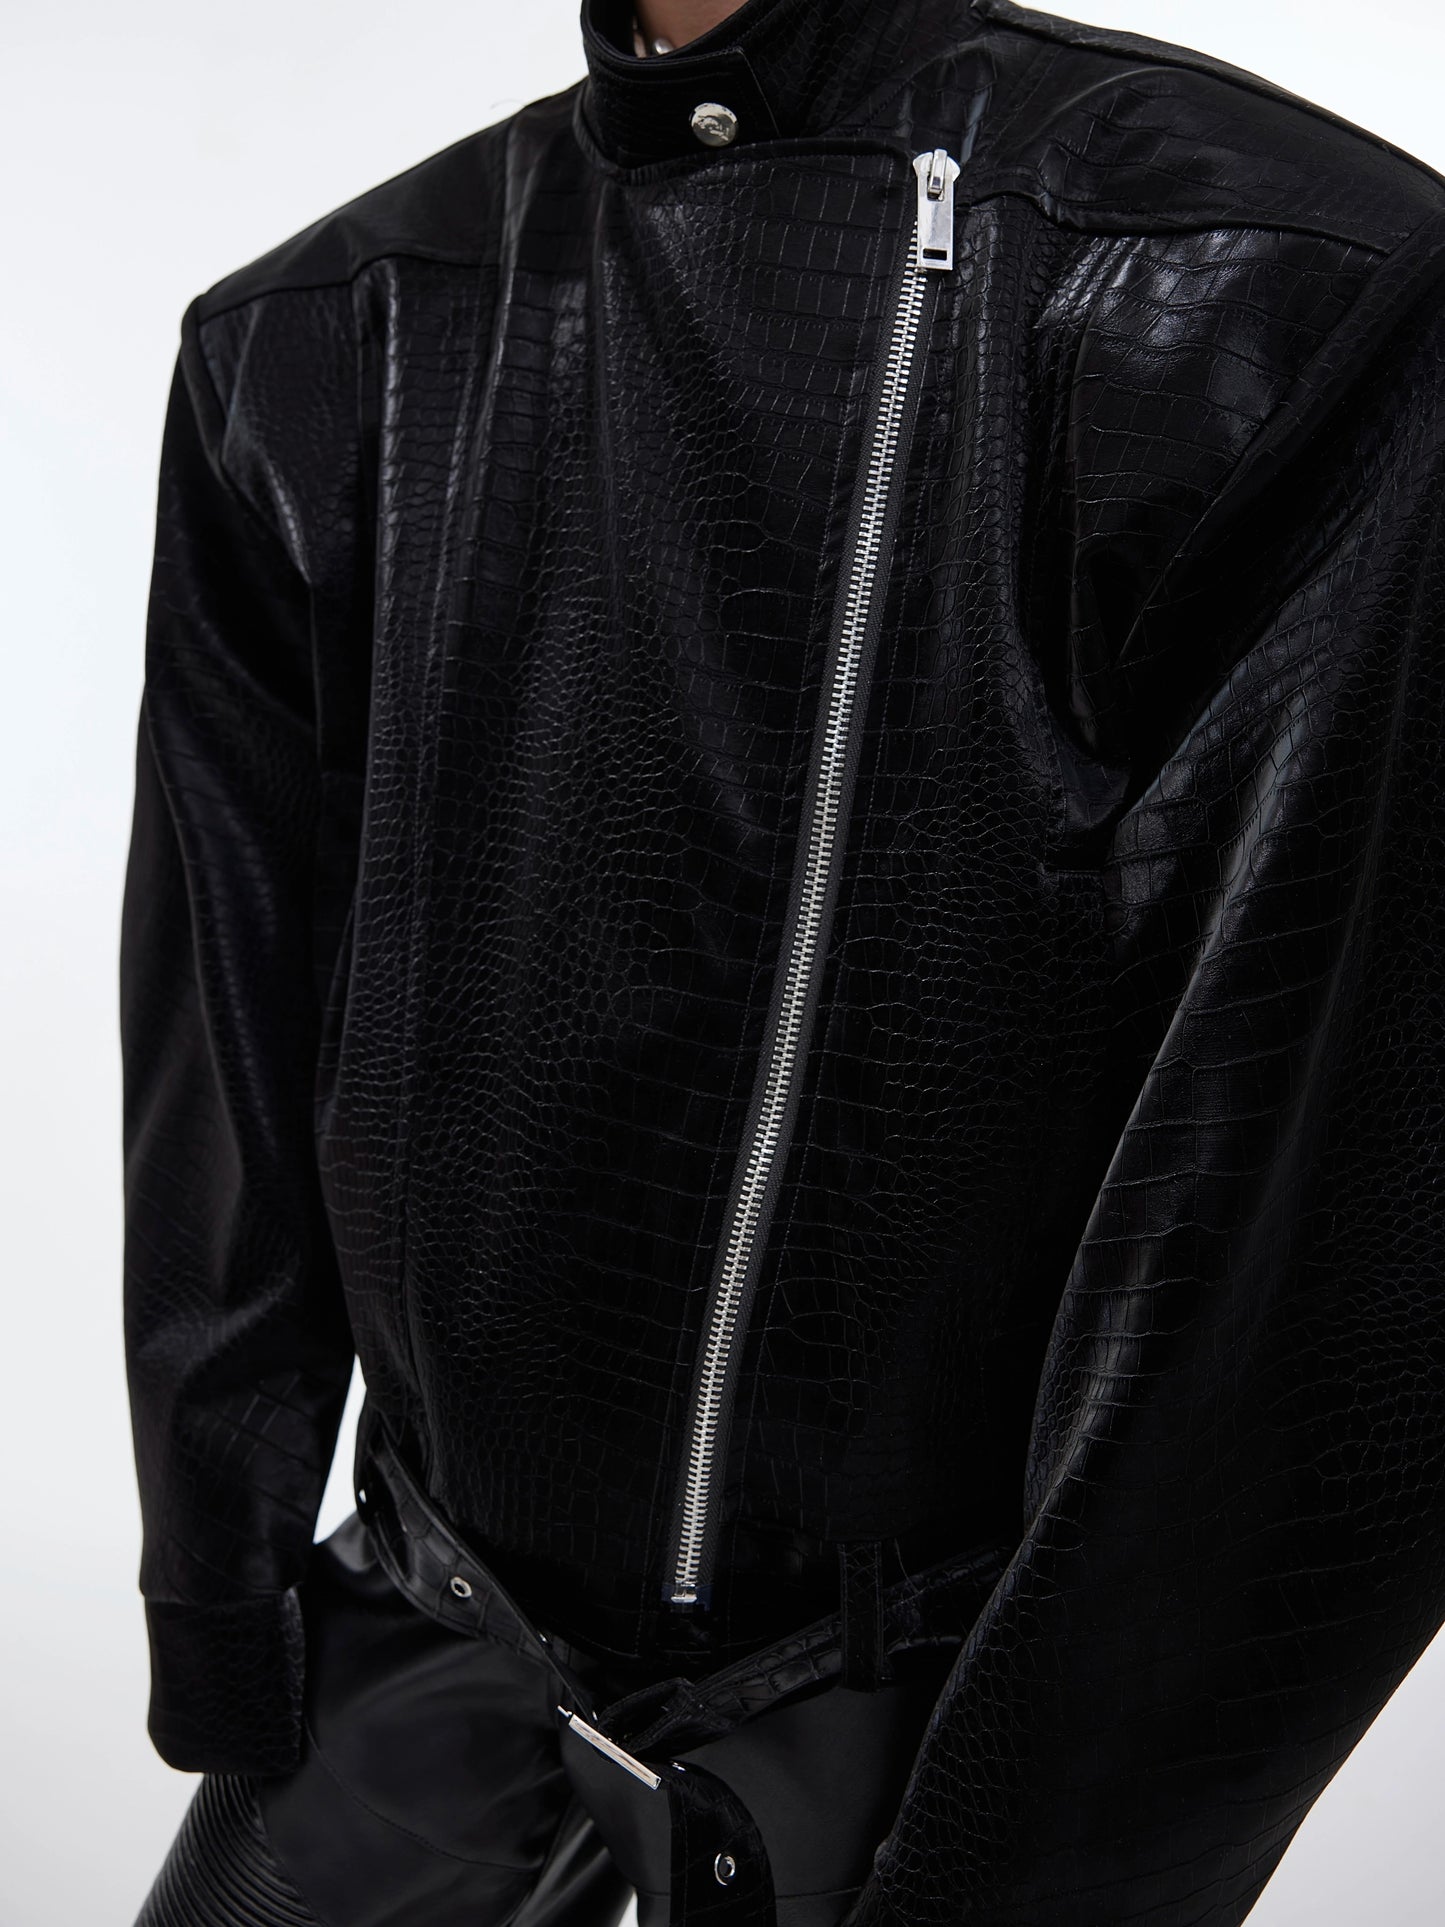 CulturE's original niche deconstructed crocodile-embossed leather jacket with a cropped silhouette jacket and a metallic design top